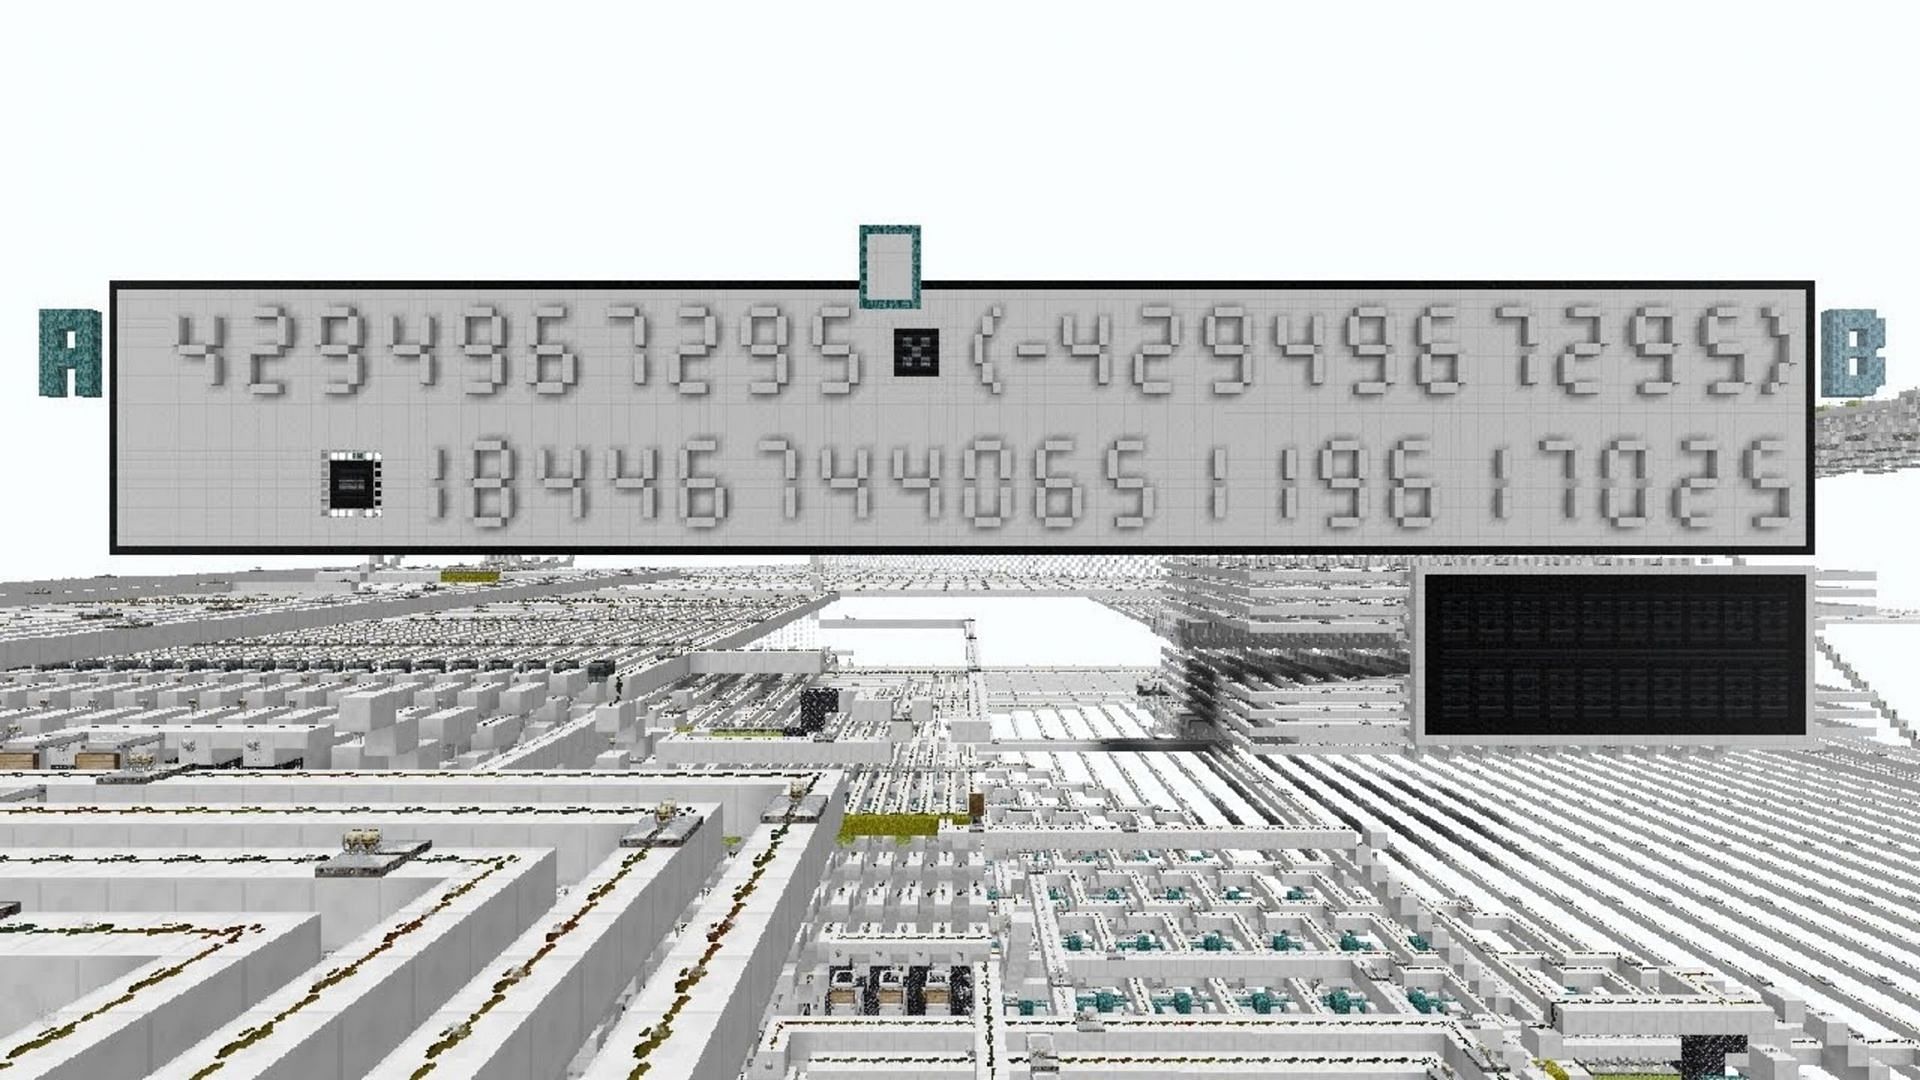 The creator of this calculator worked over 800 hours on this redstone project (Image via Kirk Hendrix/YouTube)